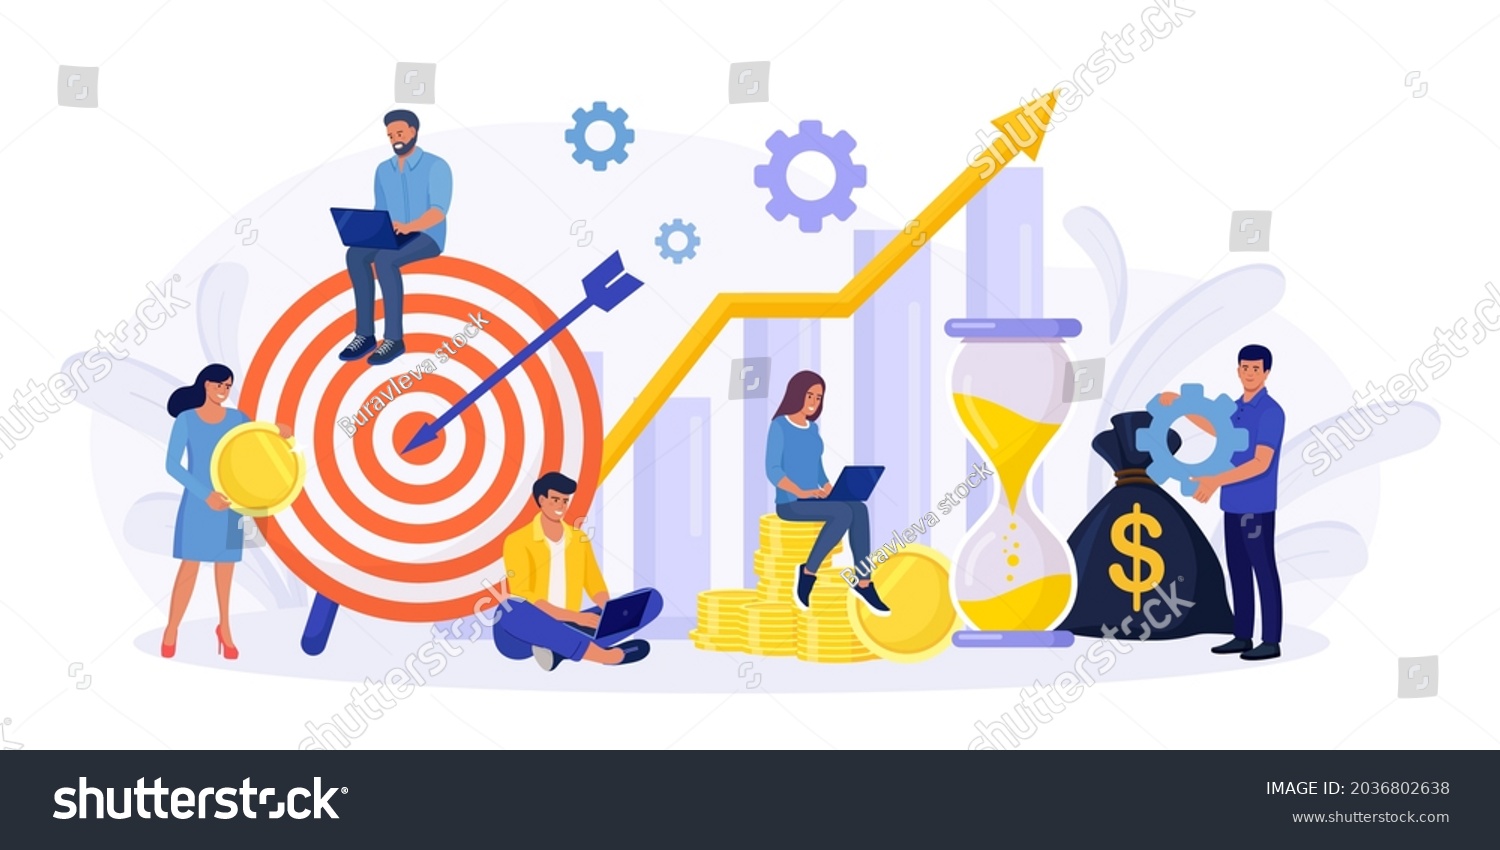 SVG of Financial Forecast. Tiny Economics Persons, Freelancer, Employee or Manager Making Investing Plans. Money Growth Prediction and Progress Report.  Return on Investment. Income Growth, Profit Earnings svg